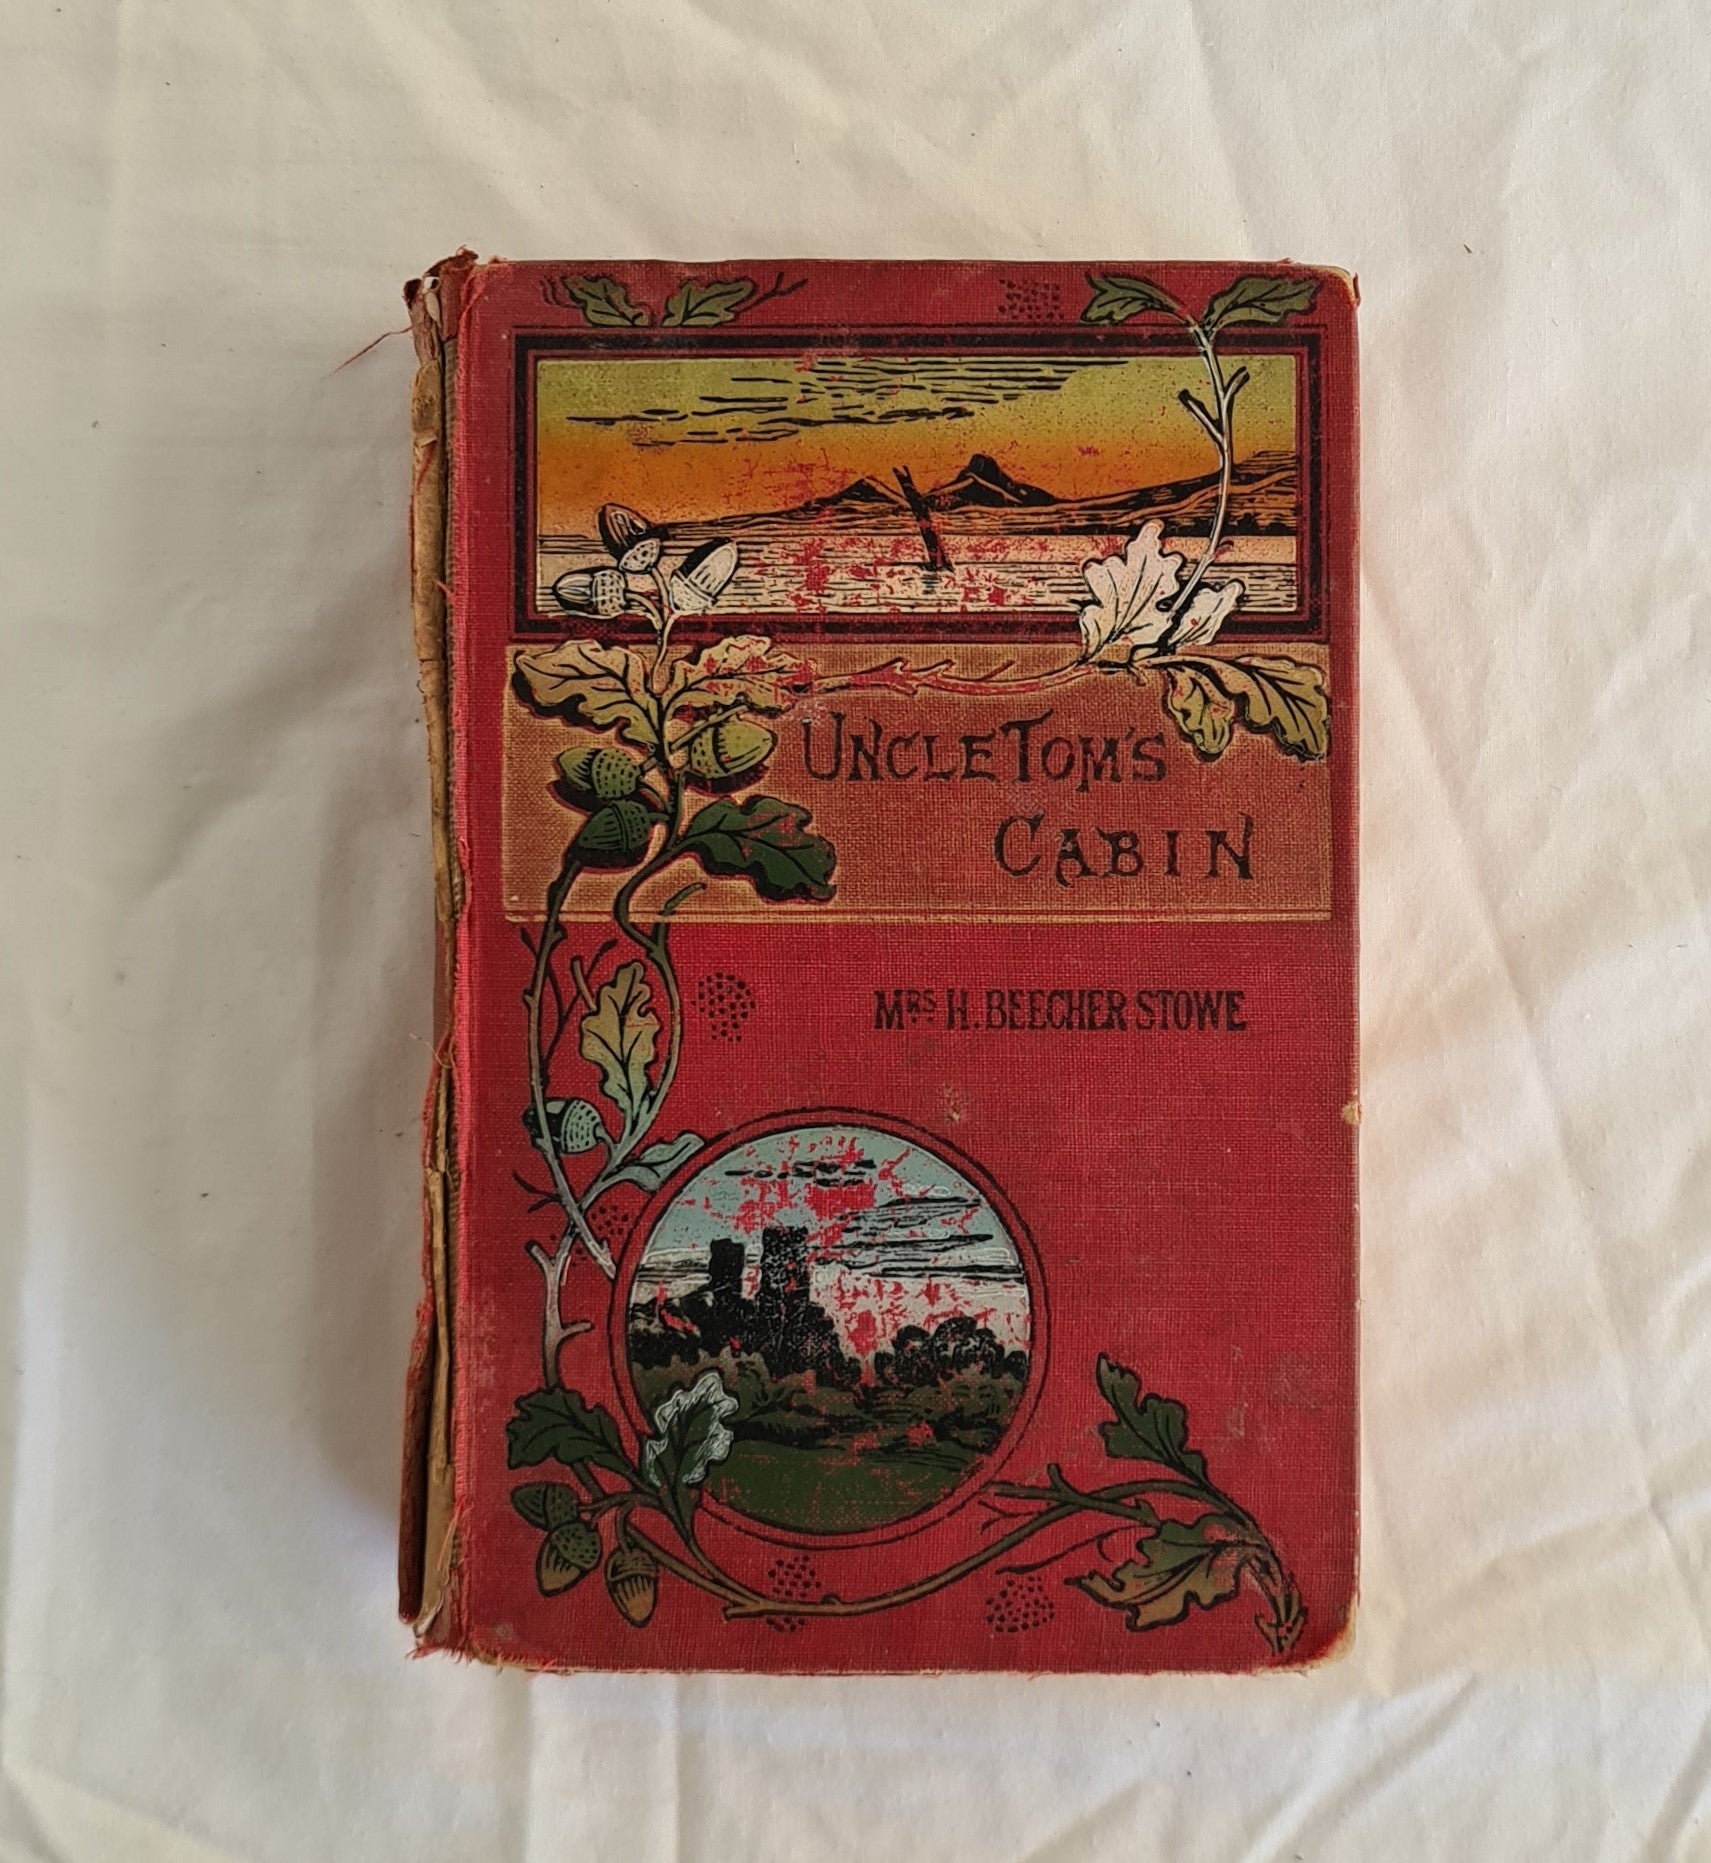 Uncle Tom’s Cabin by Mrs. H. Beecher Stowe